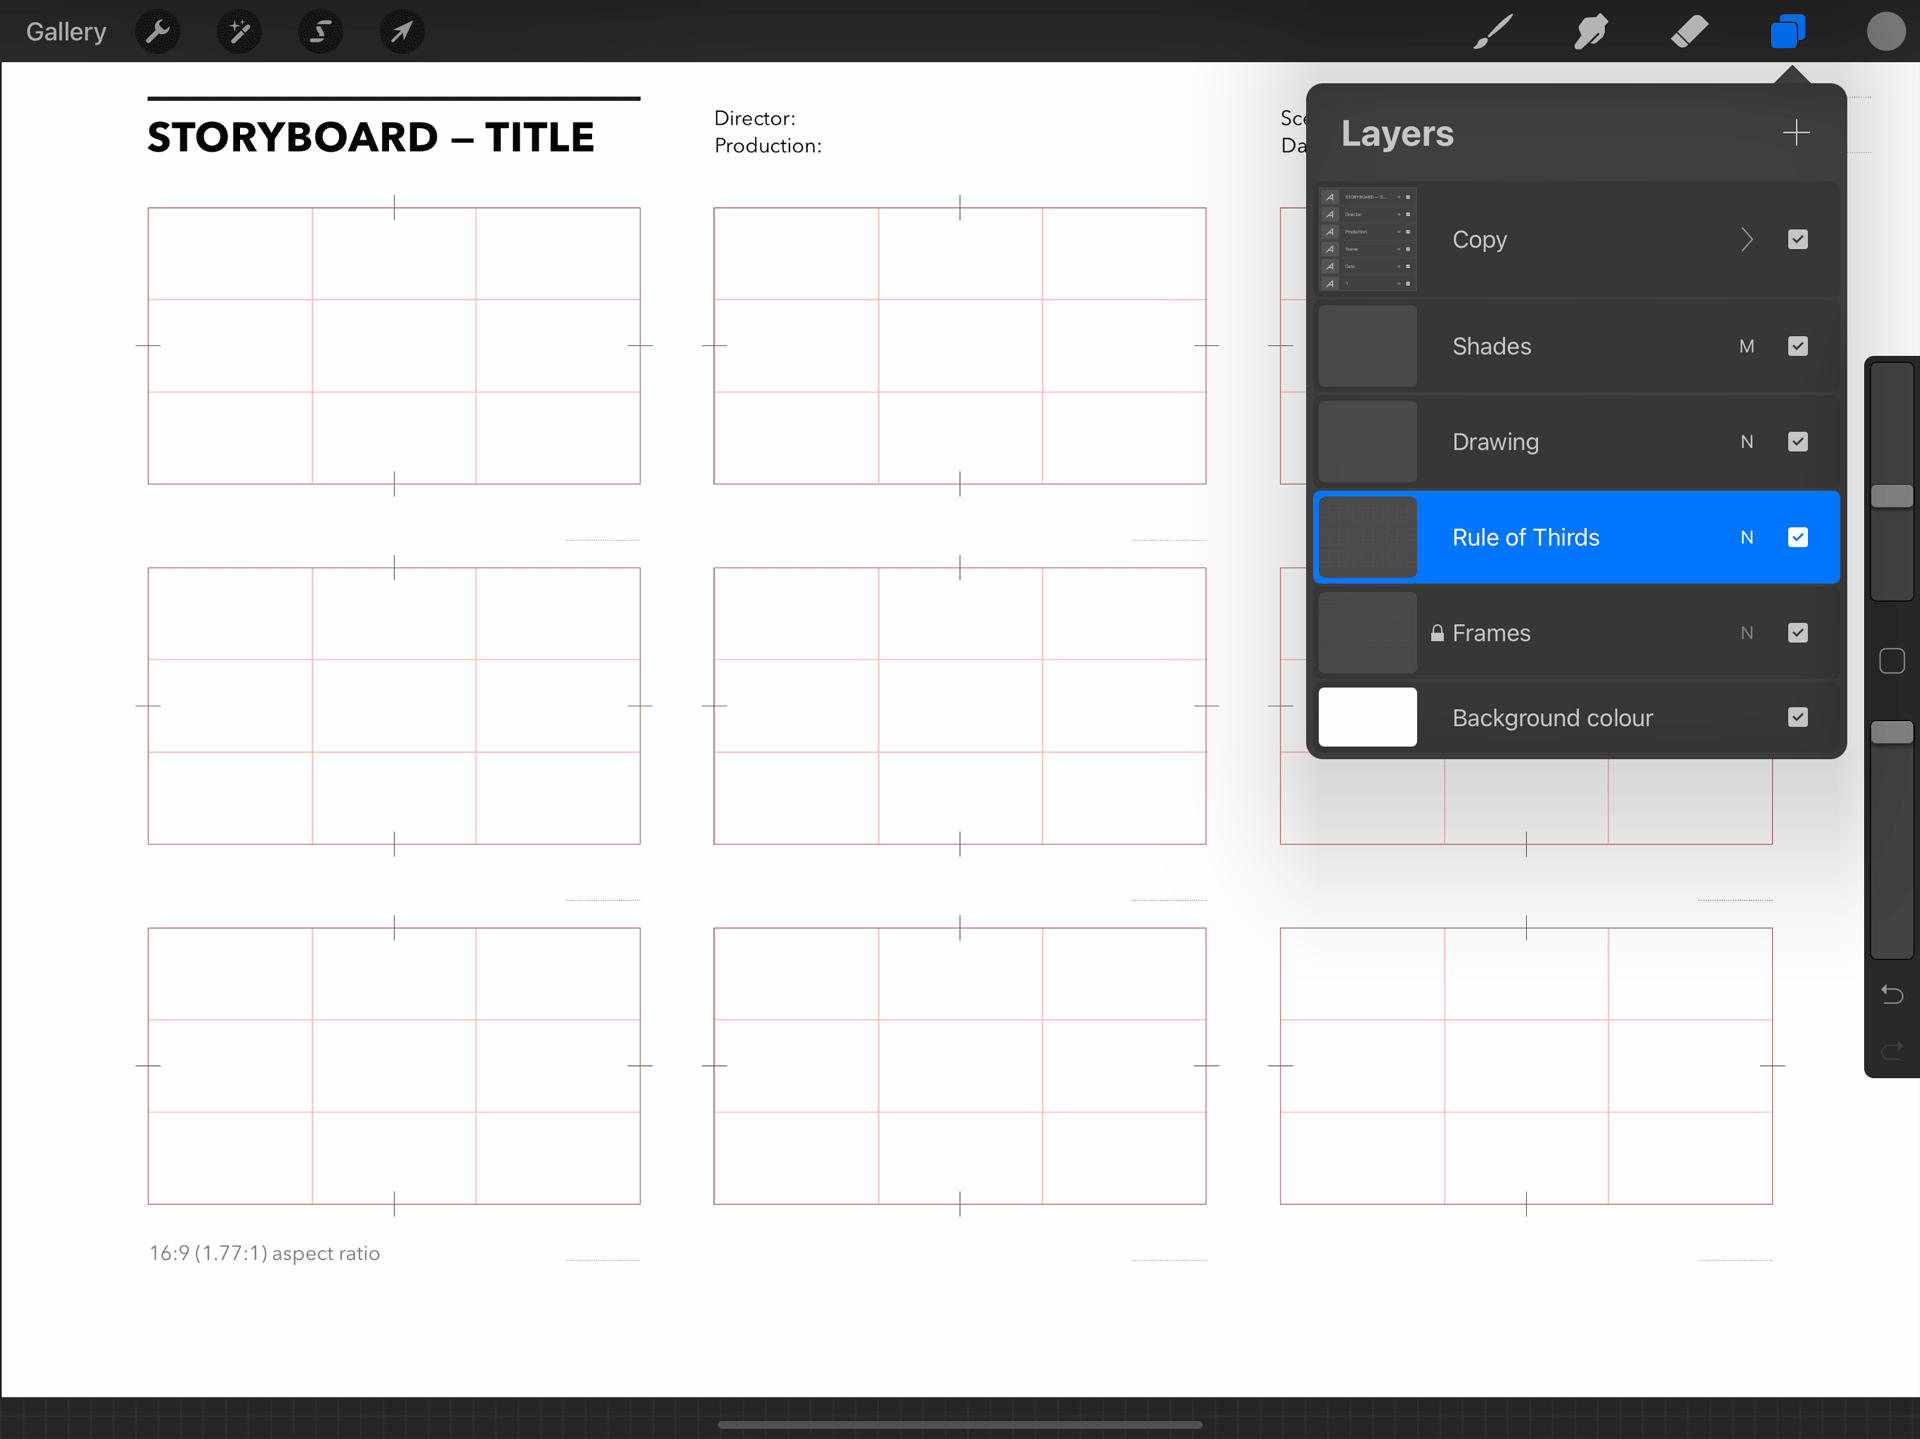 Free Procreate storyboard template for 16/9 films